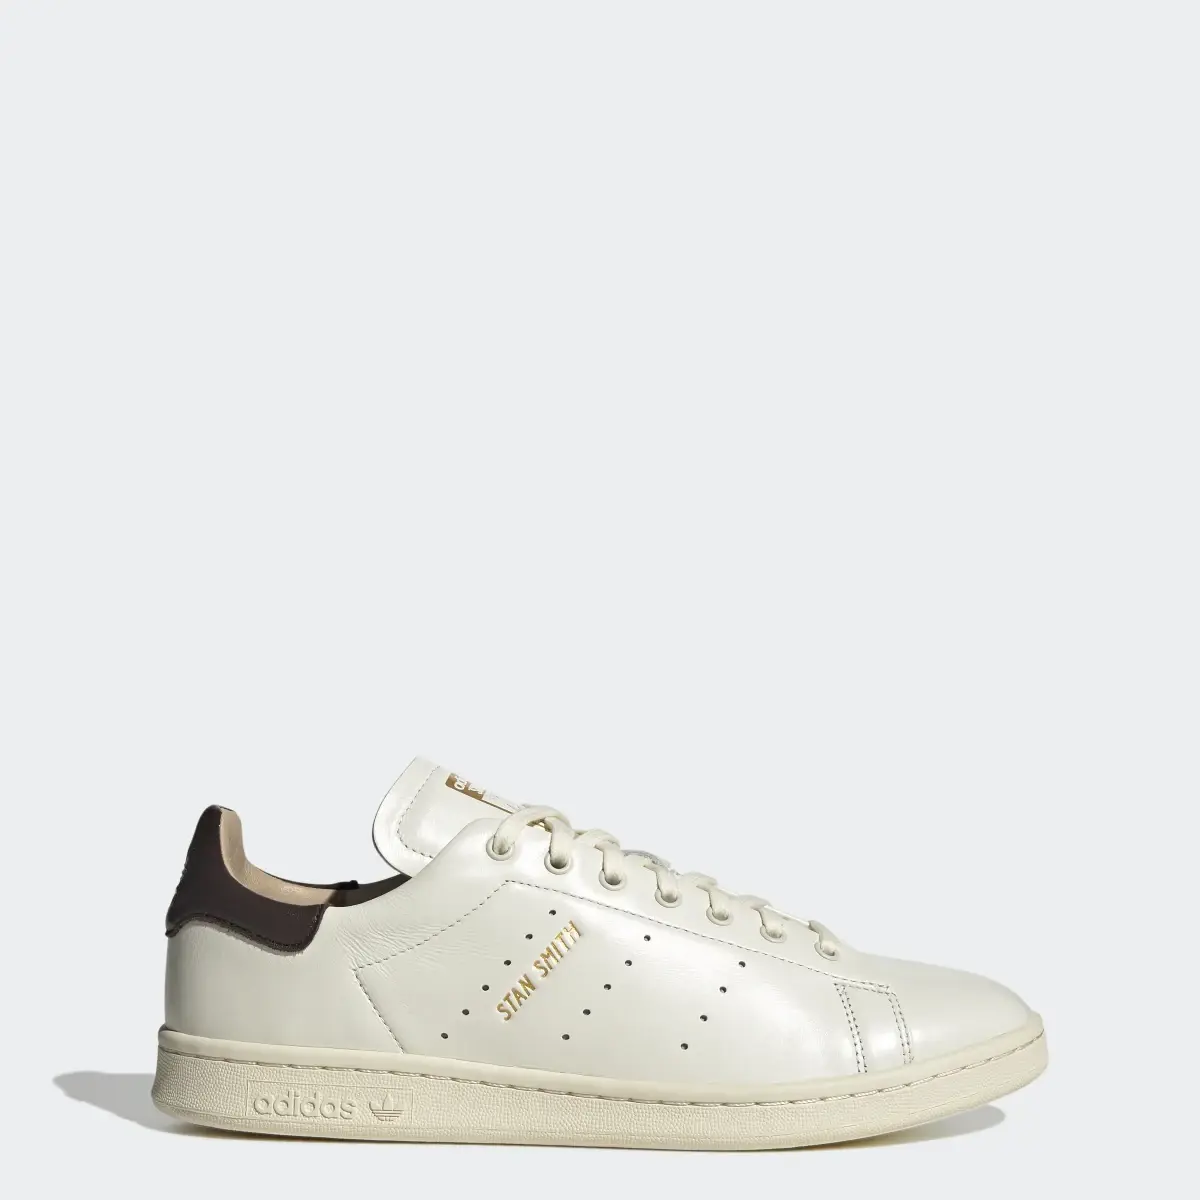 Adidas Stan Smith Lux Shoes. 1